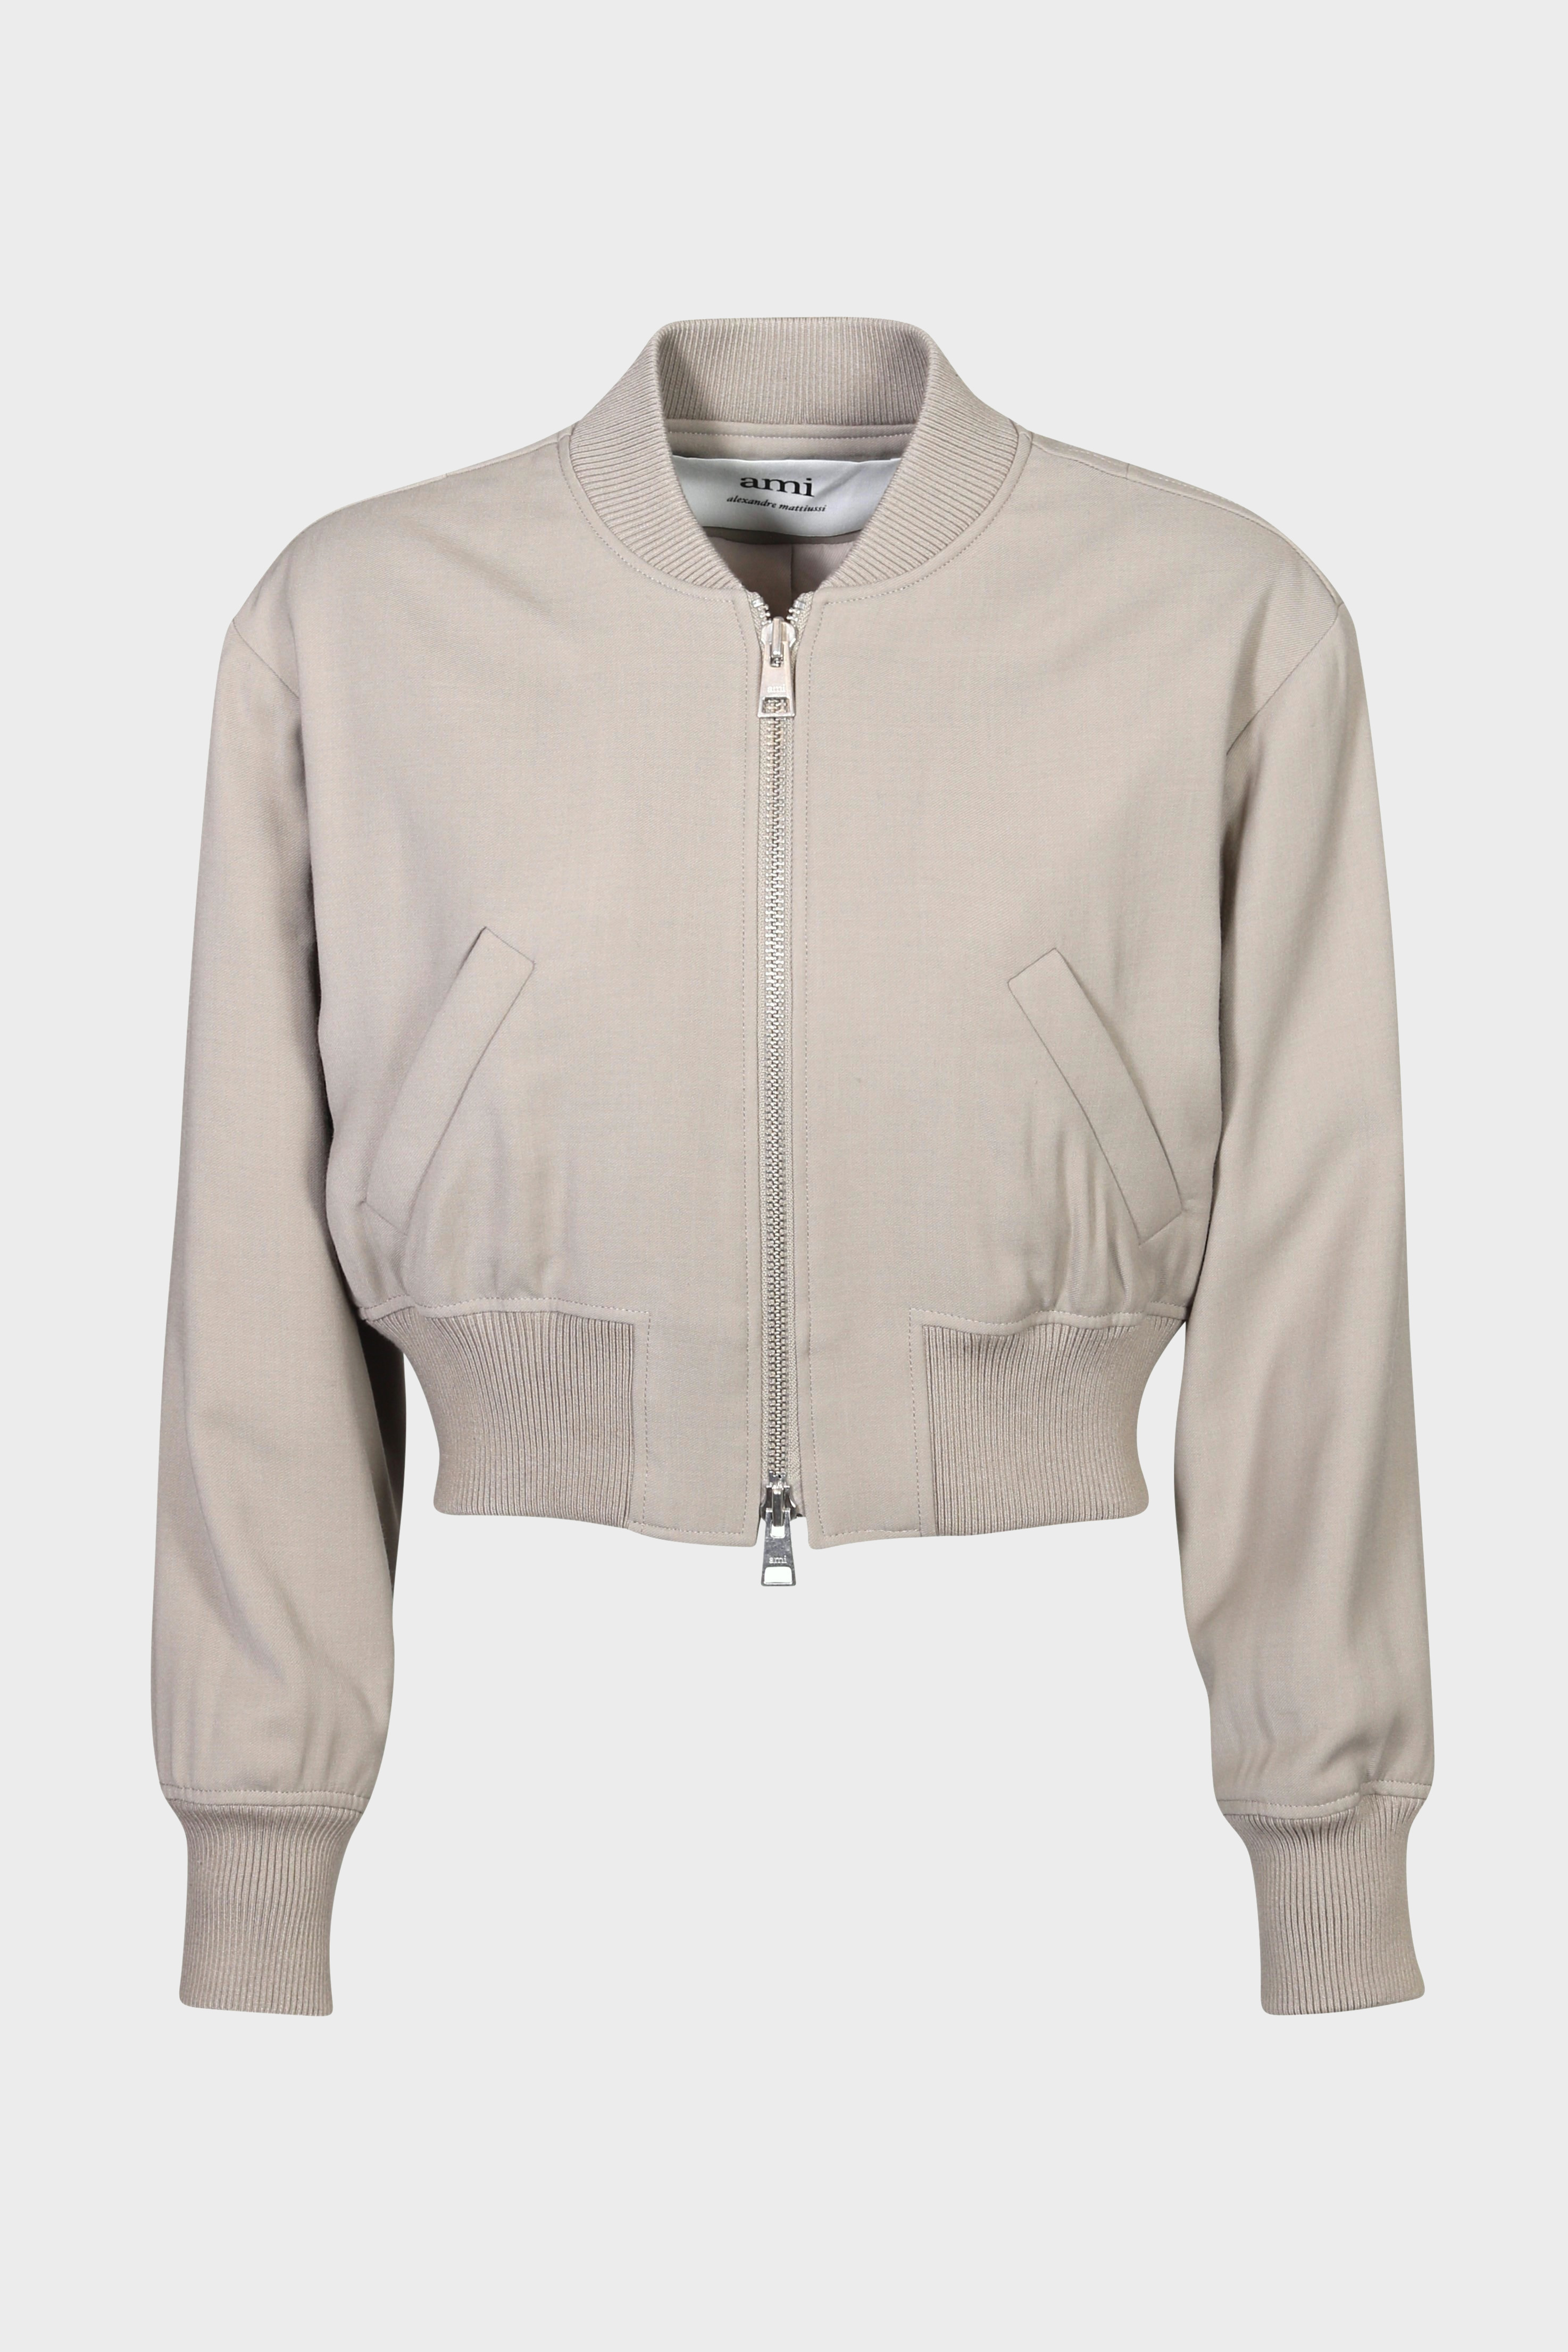 AMI PARIS Bomber Jacket in Light Taupe